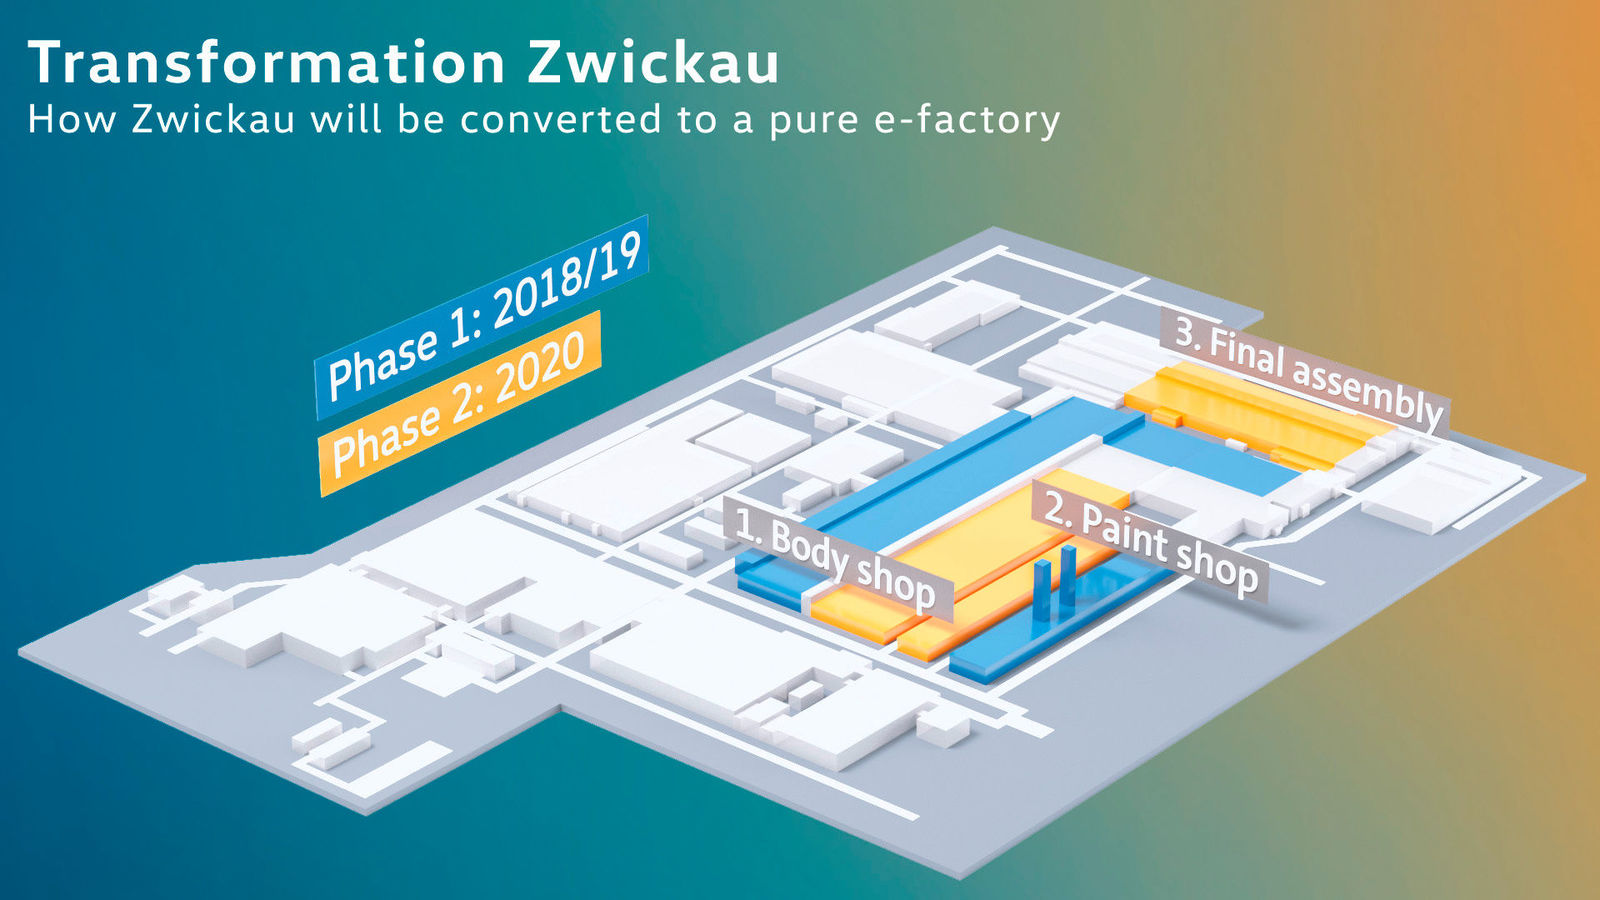 Volkswagen to make Zwickau vehicle plant Europe’s top-performing electric car factory